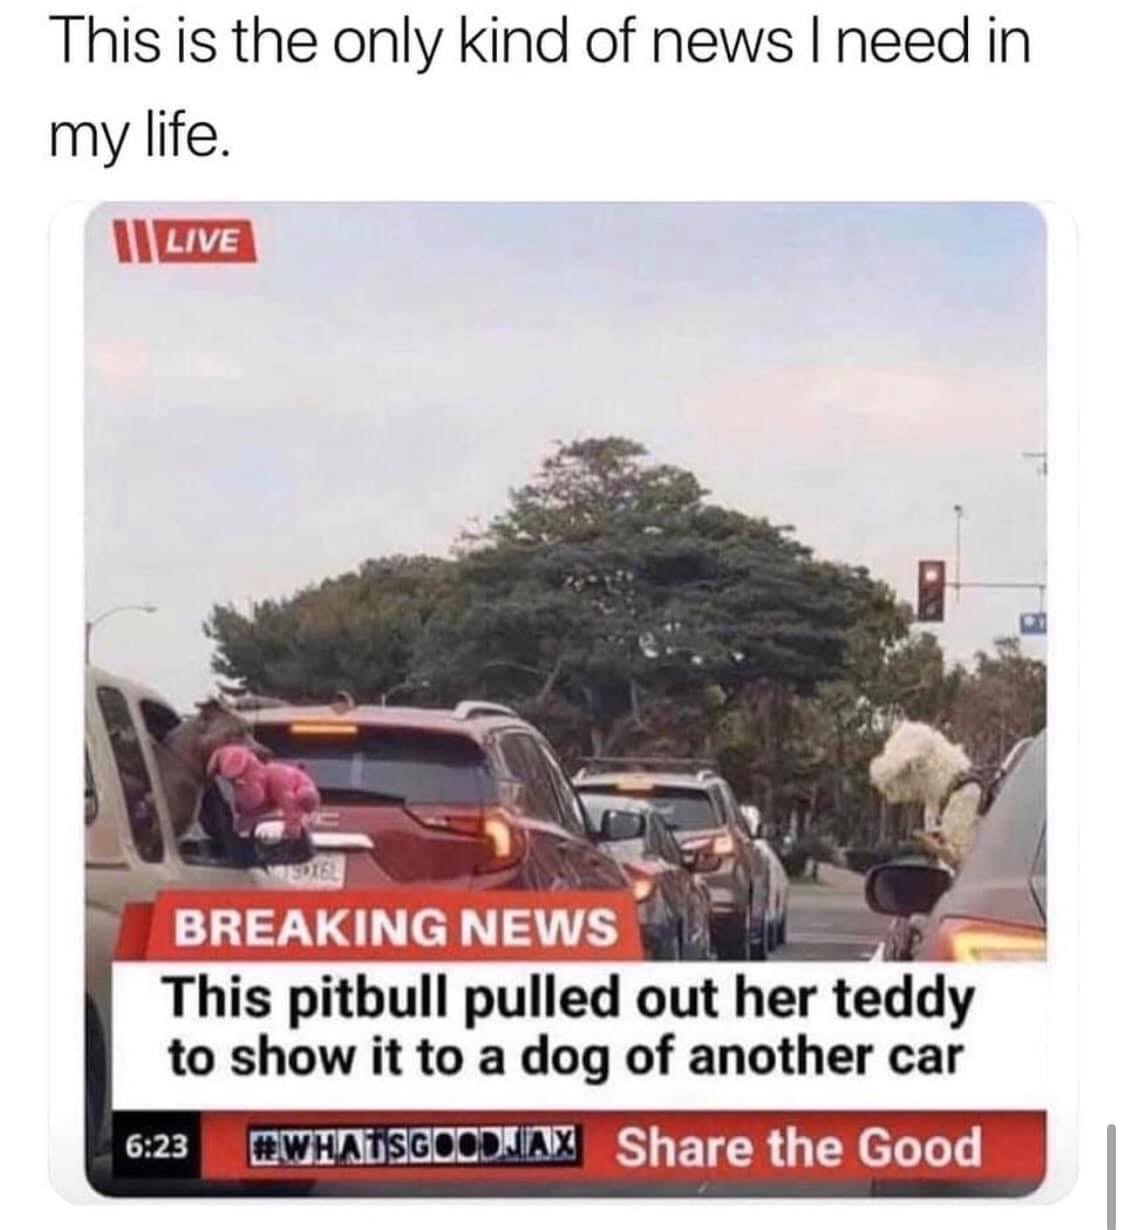 pitbull pulled out her teddy - This is the only kind of news I need in my life. I Live Nodige Breaking News This pitbull pulled out her teddy to show it to a dog of another car the Good